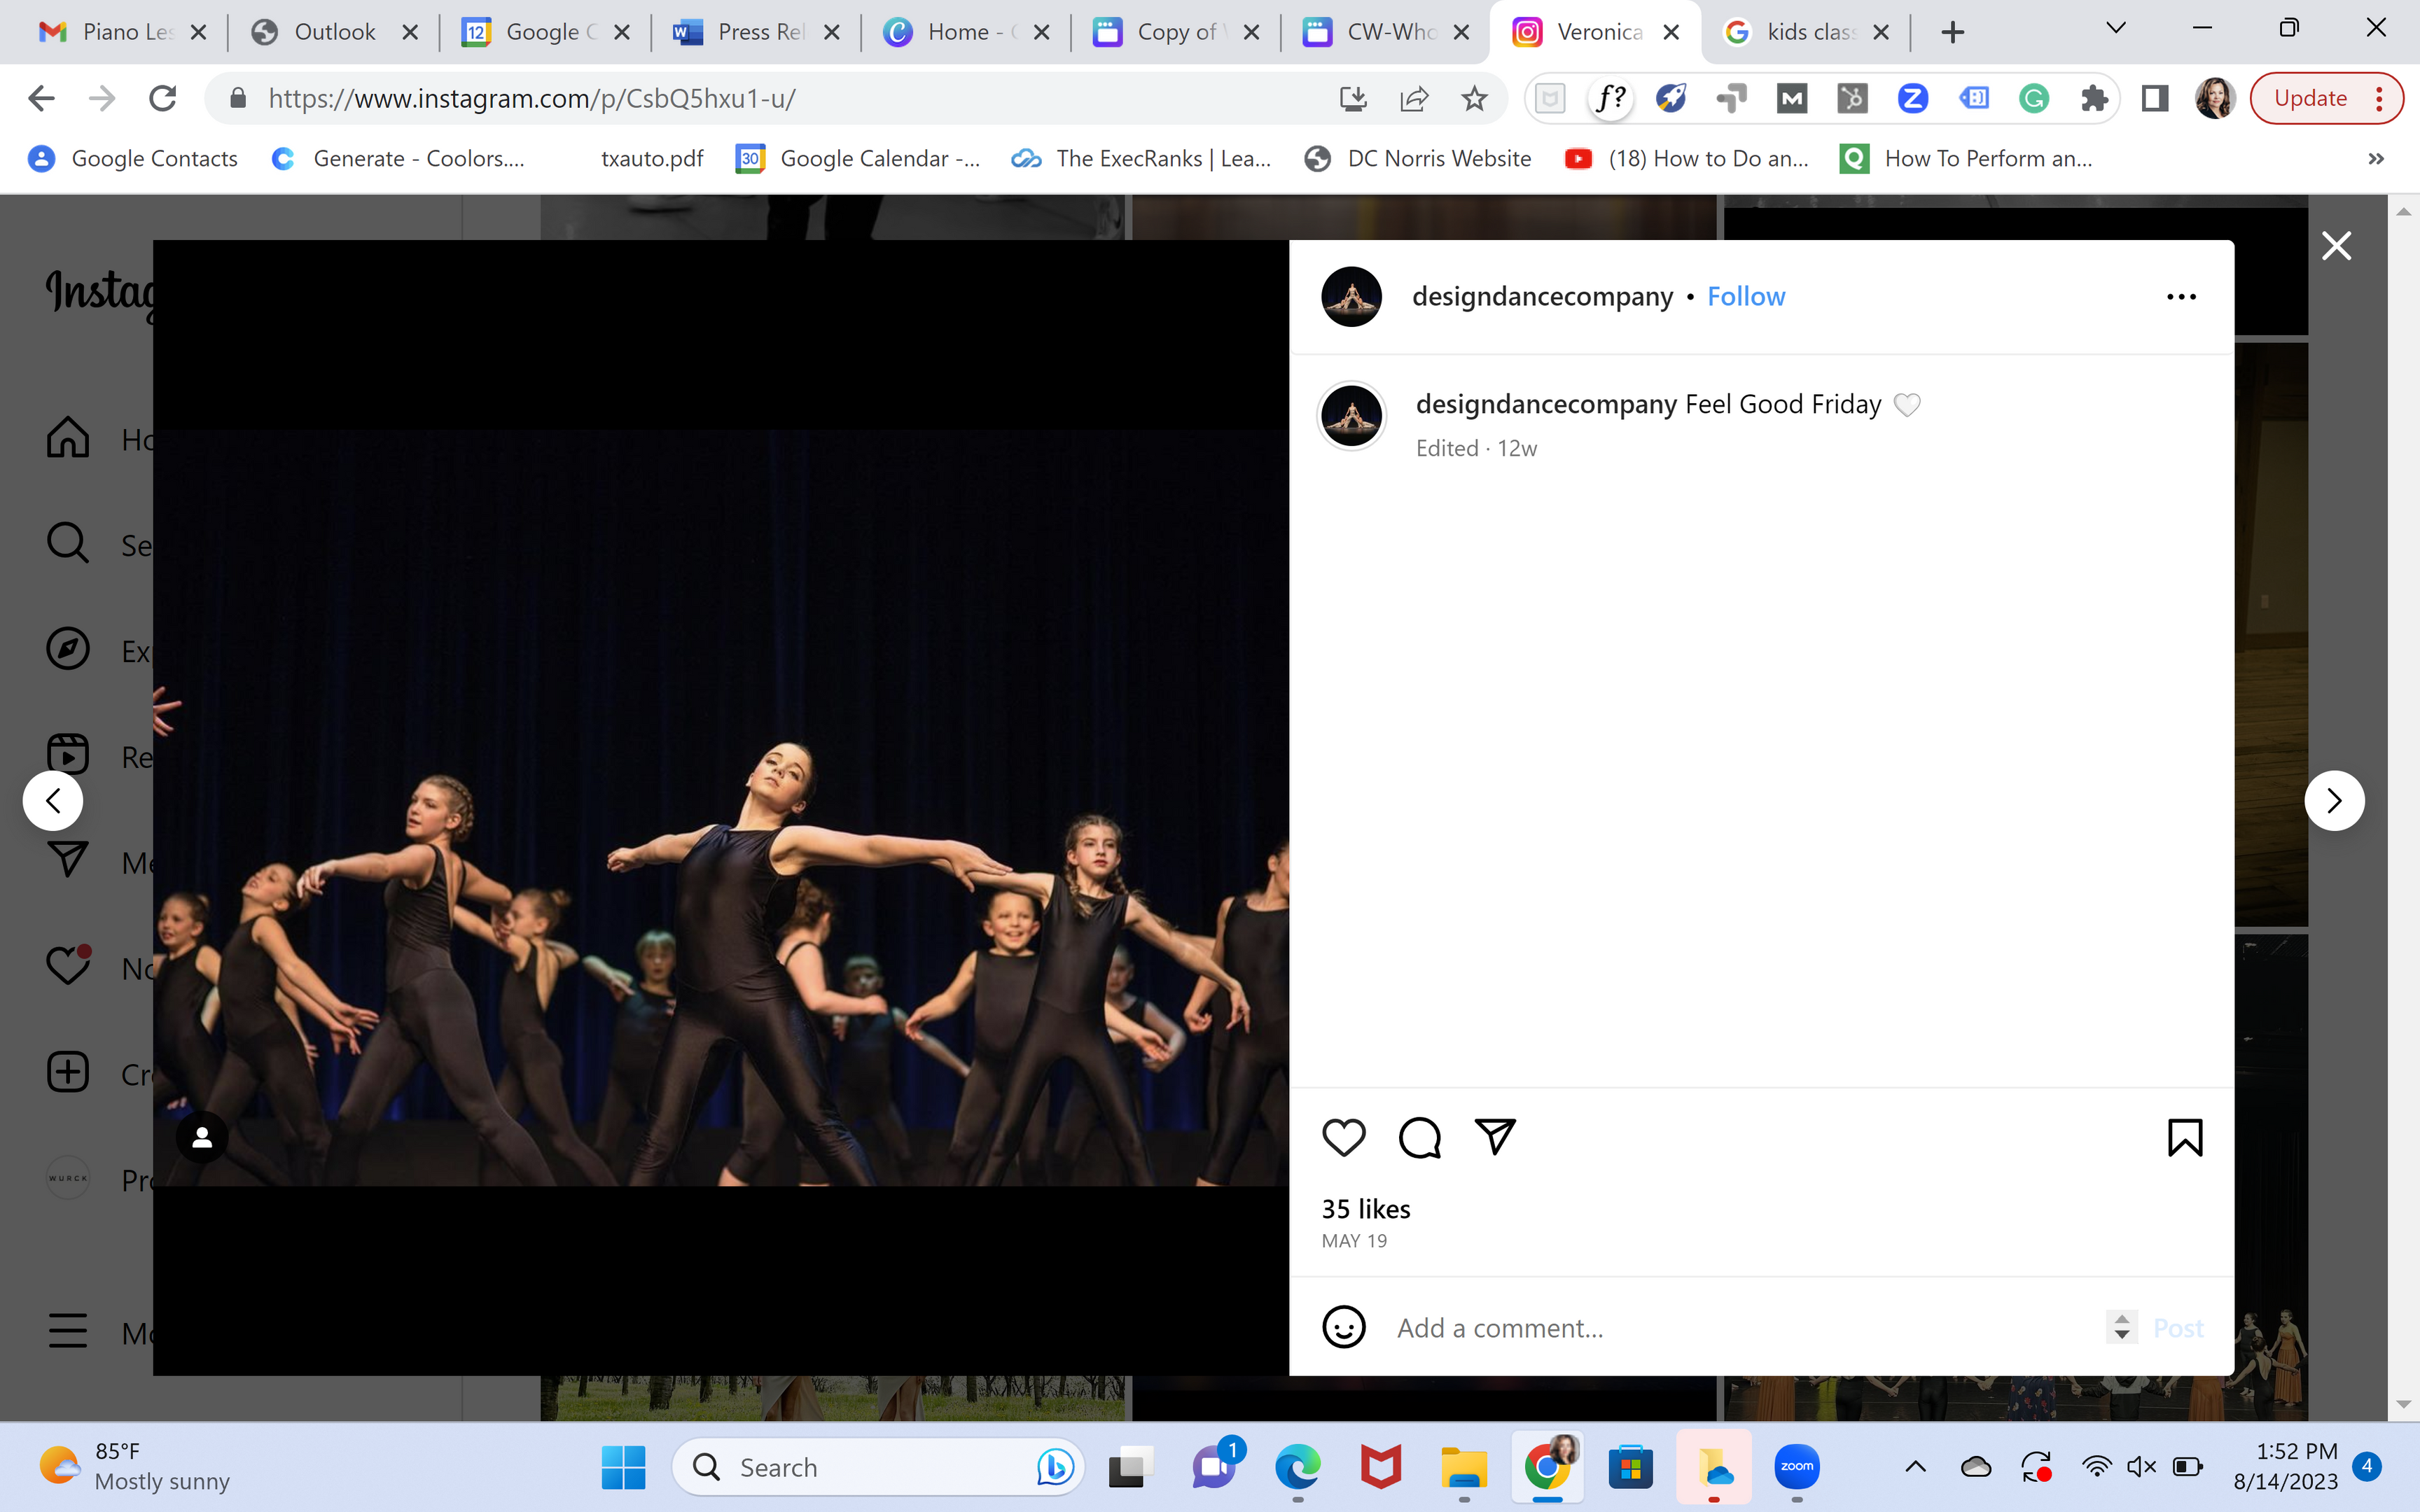 Members of Design Dance Company, Traverse City's premier dance program focused on cultivating art, community, and character warm up together on stage before their spring performance titled 'Bloom' in Traverse City, Michigan.